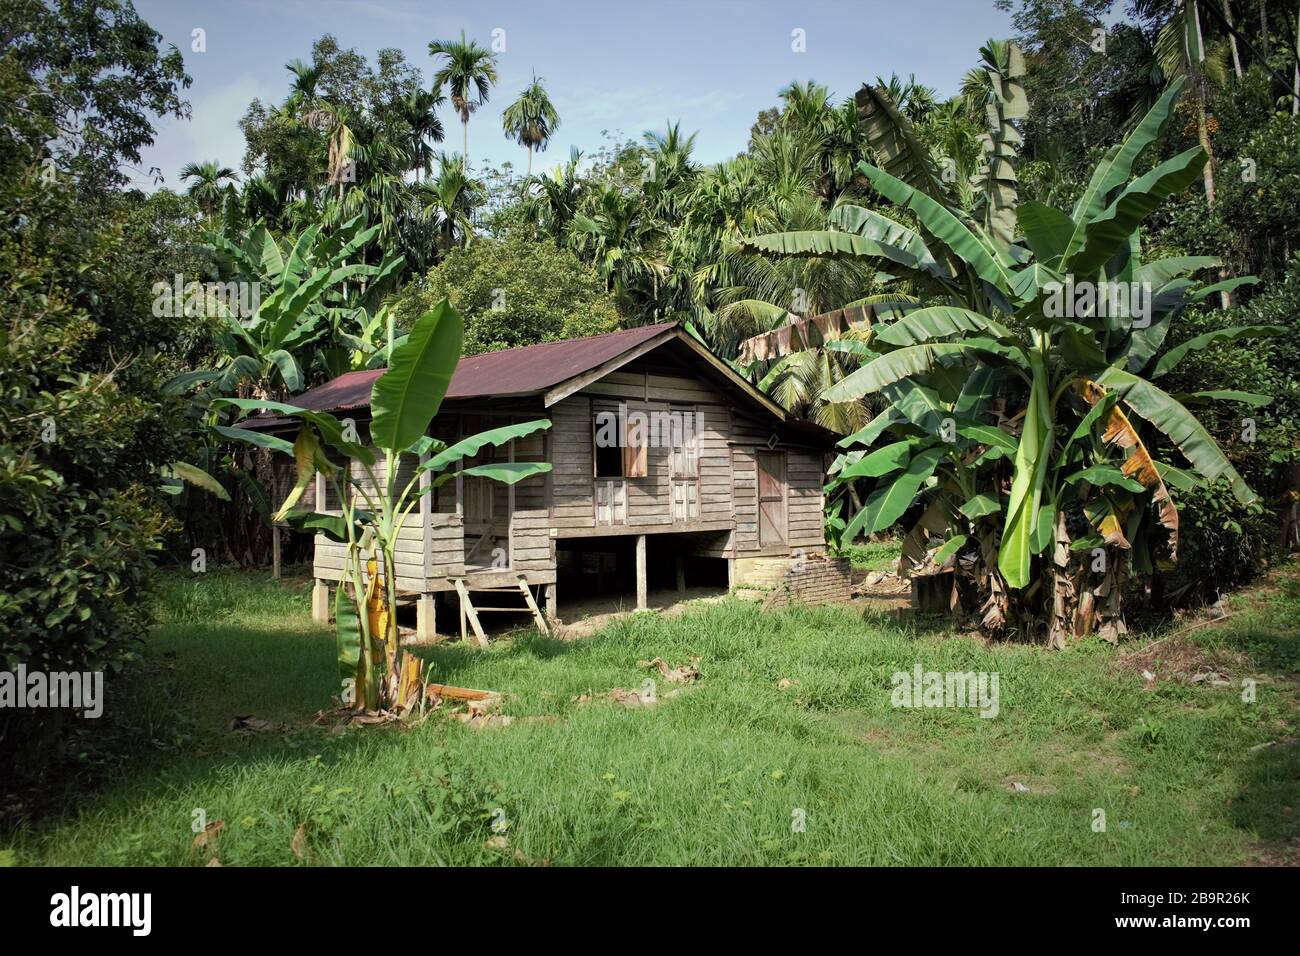 Traditional wooden house on stilts in Malaysian village, Perak province surrounded by jungle and banana trees Stock Photo